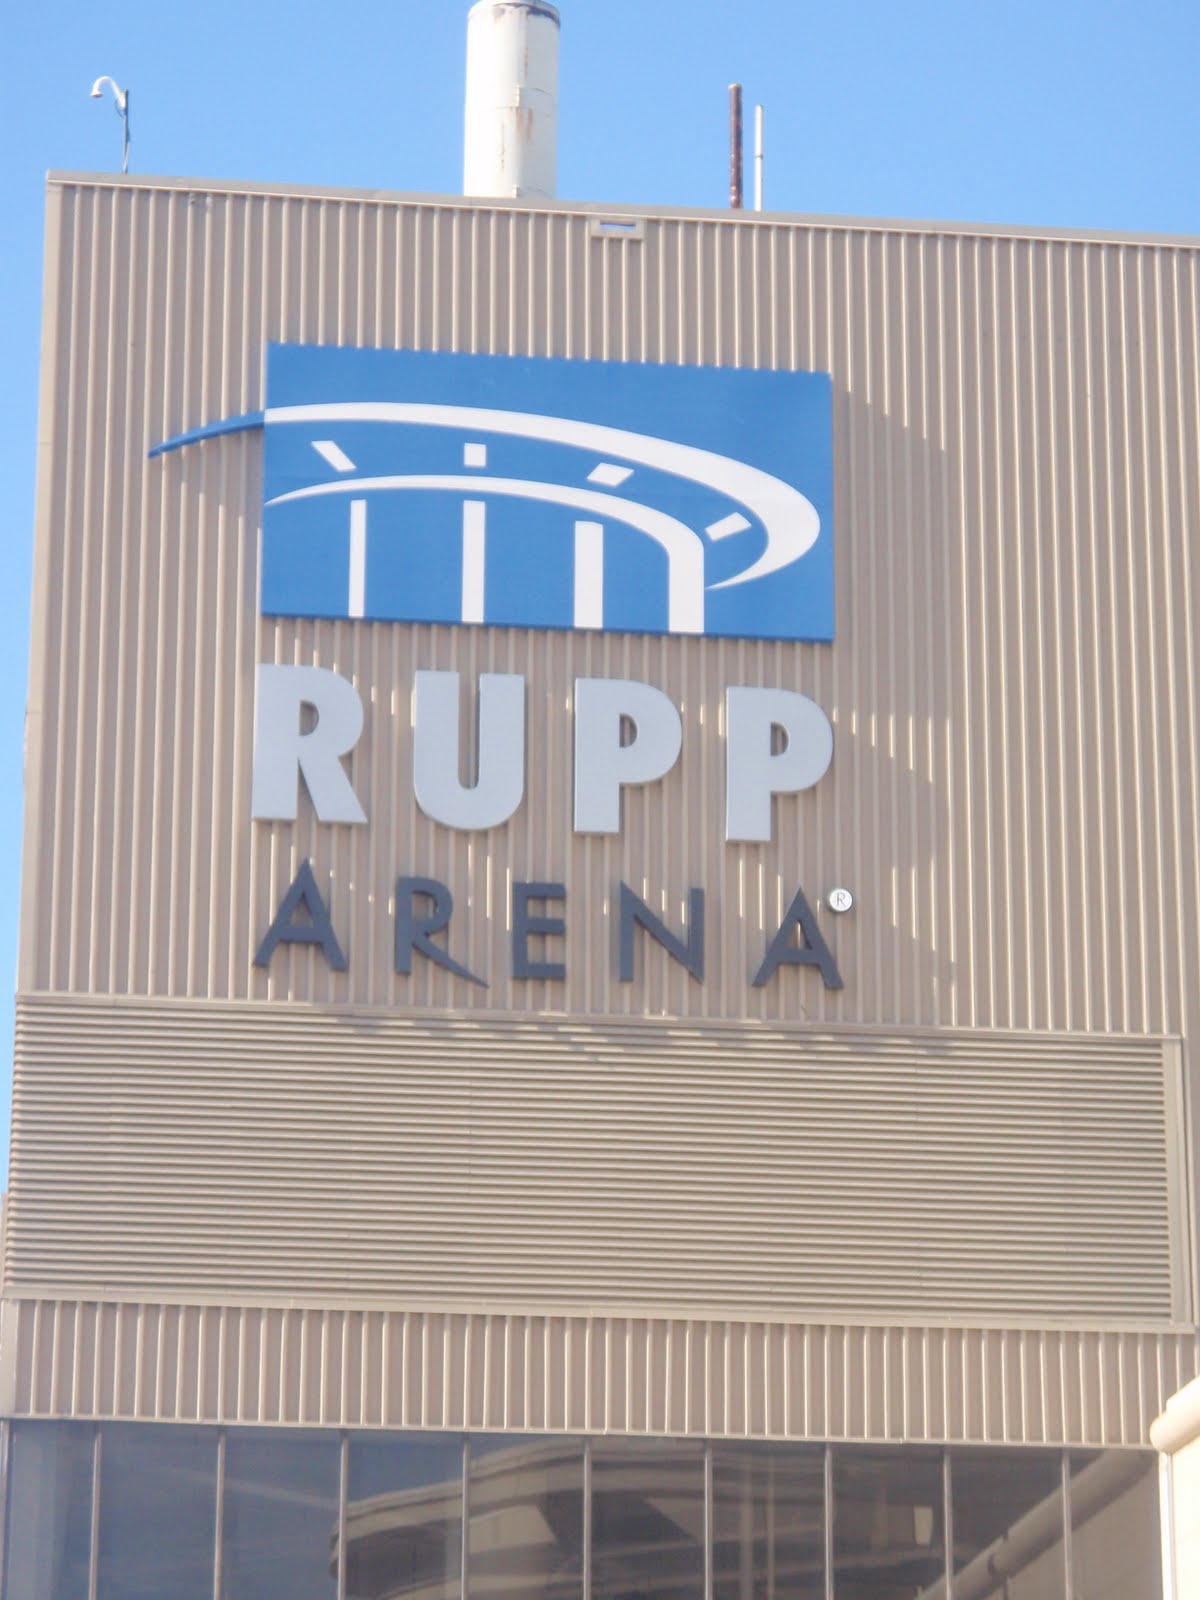 Outside Rupp Arena, one of the